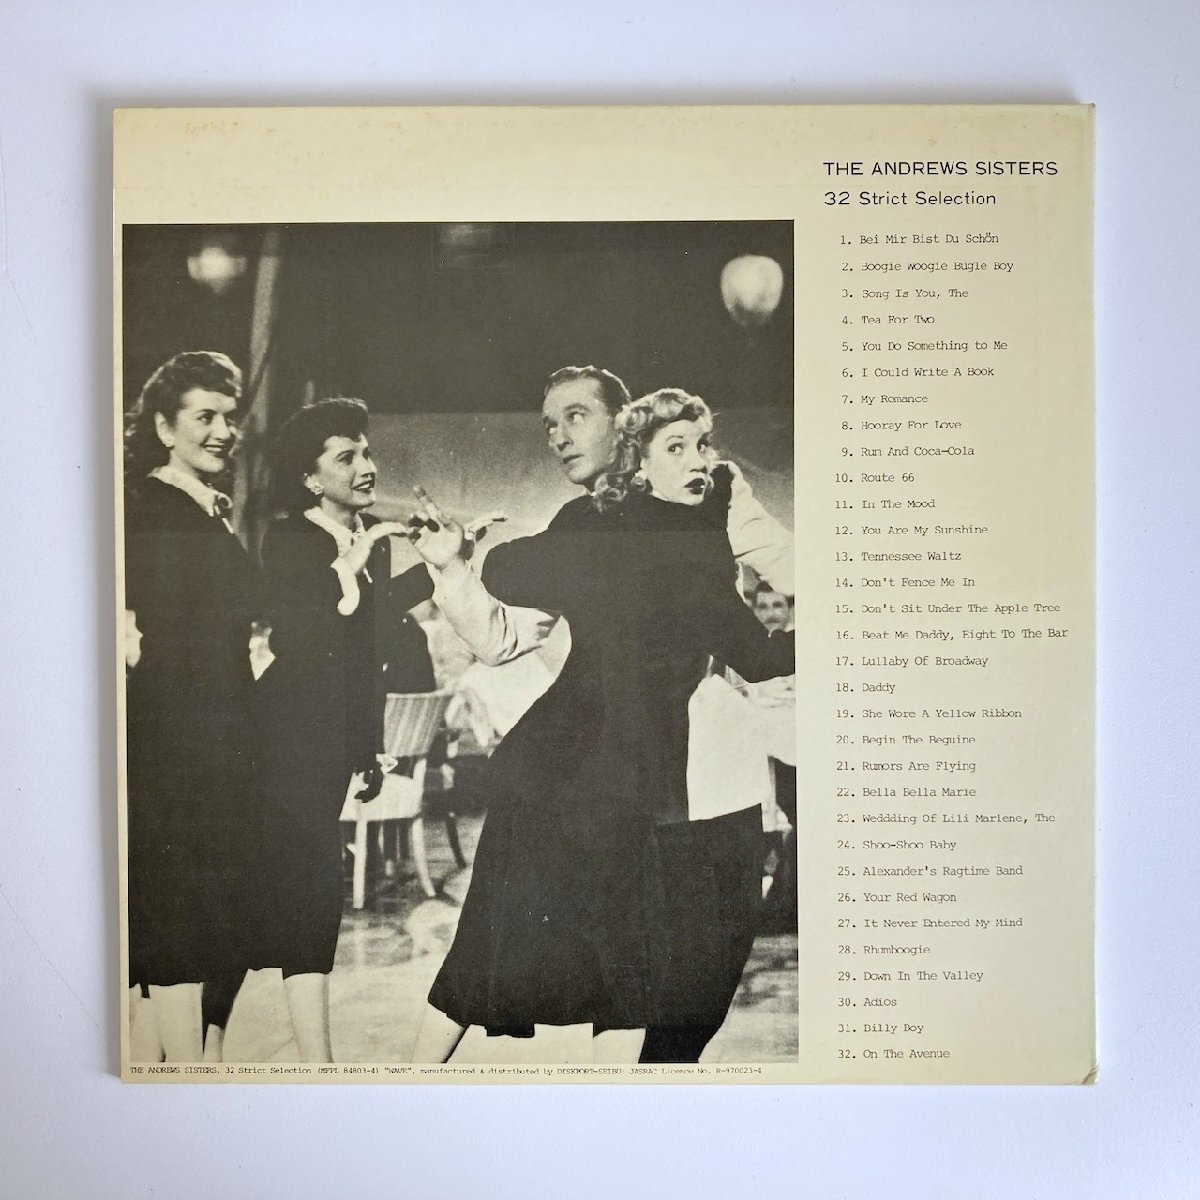 LP/ THE ANDREWS SISTERS / 32 STRICT SELECTION / アンドリューズ・シスターズ / 国内盤 2枚組 帯・ライナー WAVE MFPL84803/4 40329の画像2